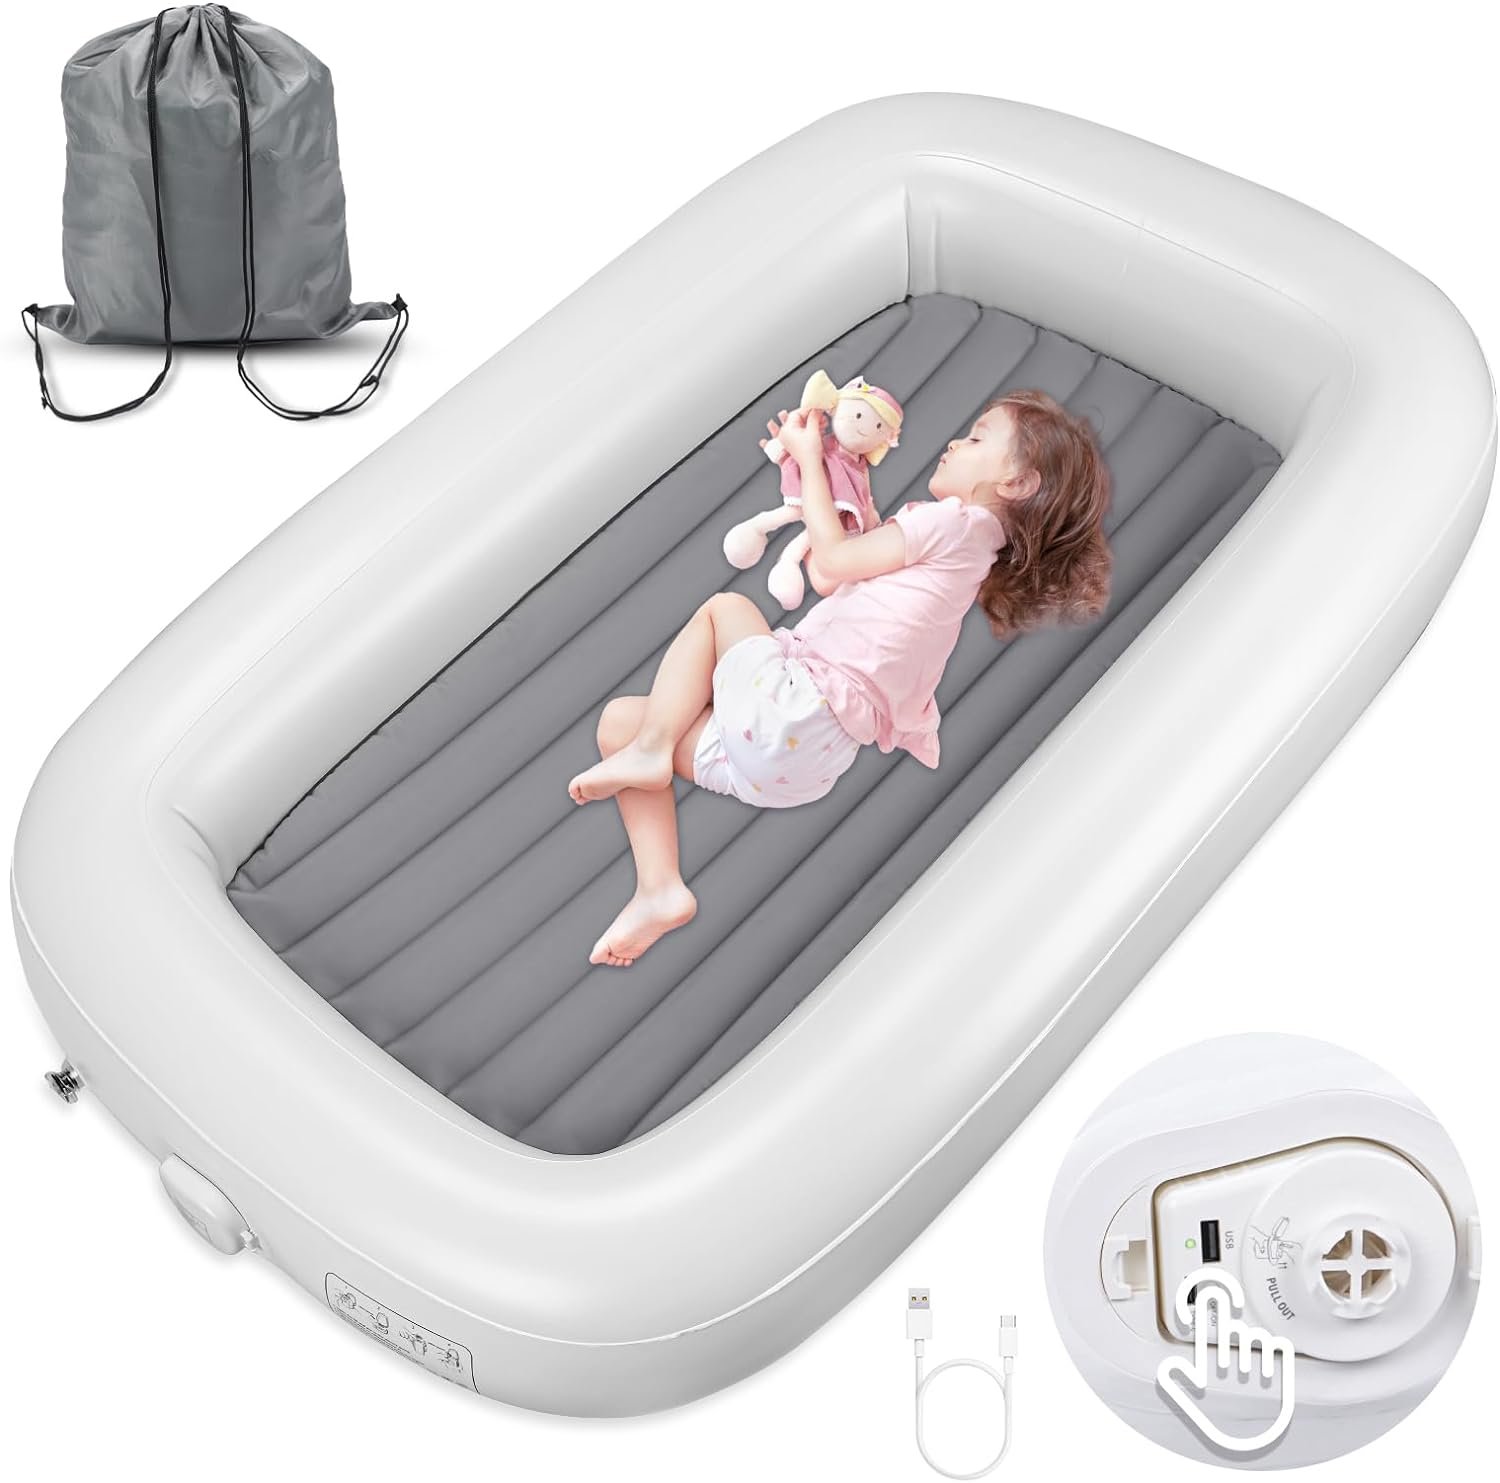 JOSEN Inflatable Toddler Travel Bed Review